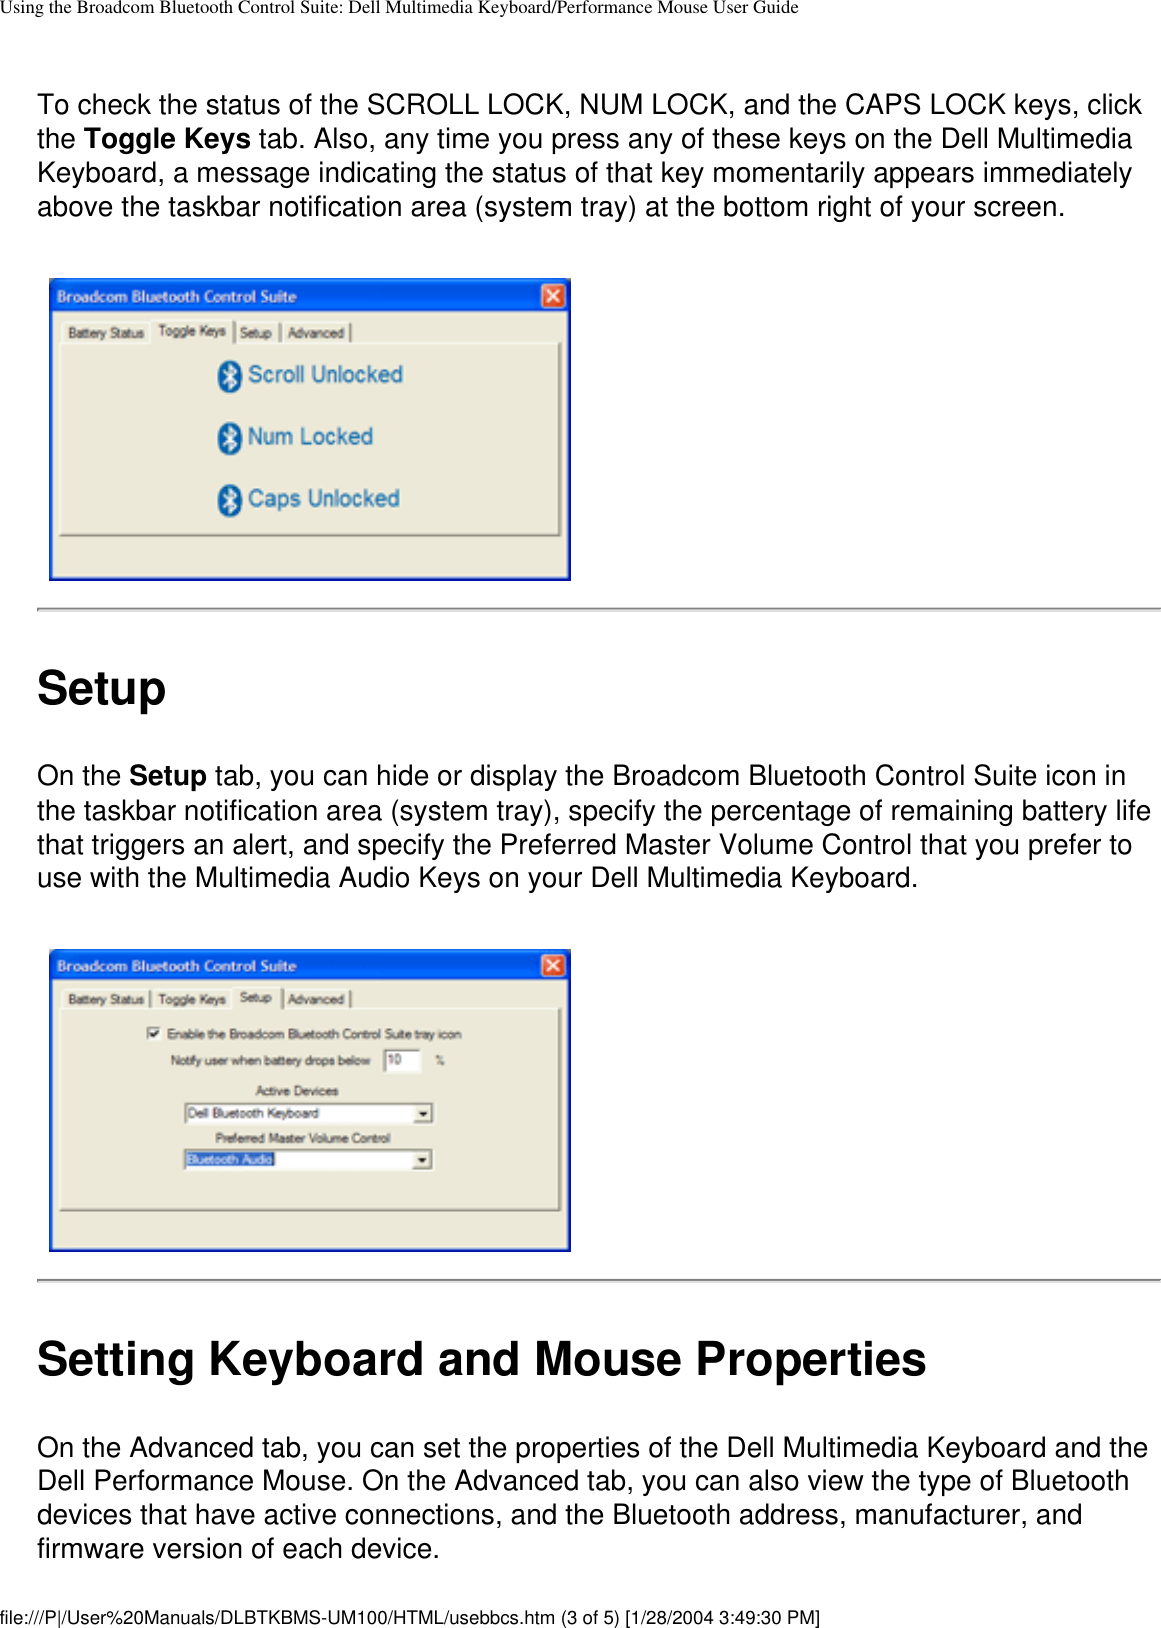 Using the Broadcom Bluetooth Control Suite: Dell Multimedia Keyboard/Performance Mouse User GuideTo check the status of the SCROLL LOCK, NUM LOCK, and the CAPS LOCK keys, click the Toggle Keys tab. Also, any time you press any of these keys on the Dell Multimedia Keyboard, a message indicating the status of that key momentarily appears immediately above the taskbar notification area (system tray) at the bottom right of your screen. SetupOn the Setup tab, you can hide or display the Broadcom Bluetooth Control Suite icon in the taskbar notification area (system tray), specify the percentage of remaining battery life that triggers an alert, and specify the Preferred Master Volume Control that you prefer to use with the Multimedia Audio Keys on your Dell Multimedia Keyboard.Setting Keyboard and Mouse PropertiesOn the Advanced tab, you can set the properties of the Dell Multimedia Keyboard and the Dell Performance Mouse. On the Advanced tab, you can also view the type of Bluetooth devices that have active connections, and the Bluetooth address, manufacturer, and firmware version of each device.file:///P|/User%20Manuals/DLBTKBMS-UM100/HTML/usebbcs.htm (3 of 5) [1/28/2004 3:49:30 PM]